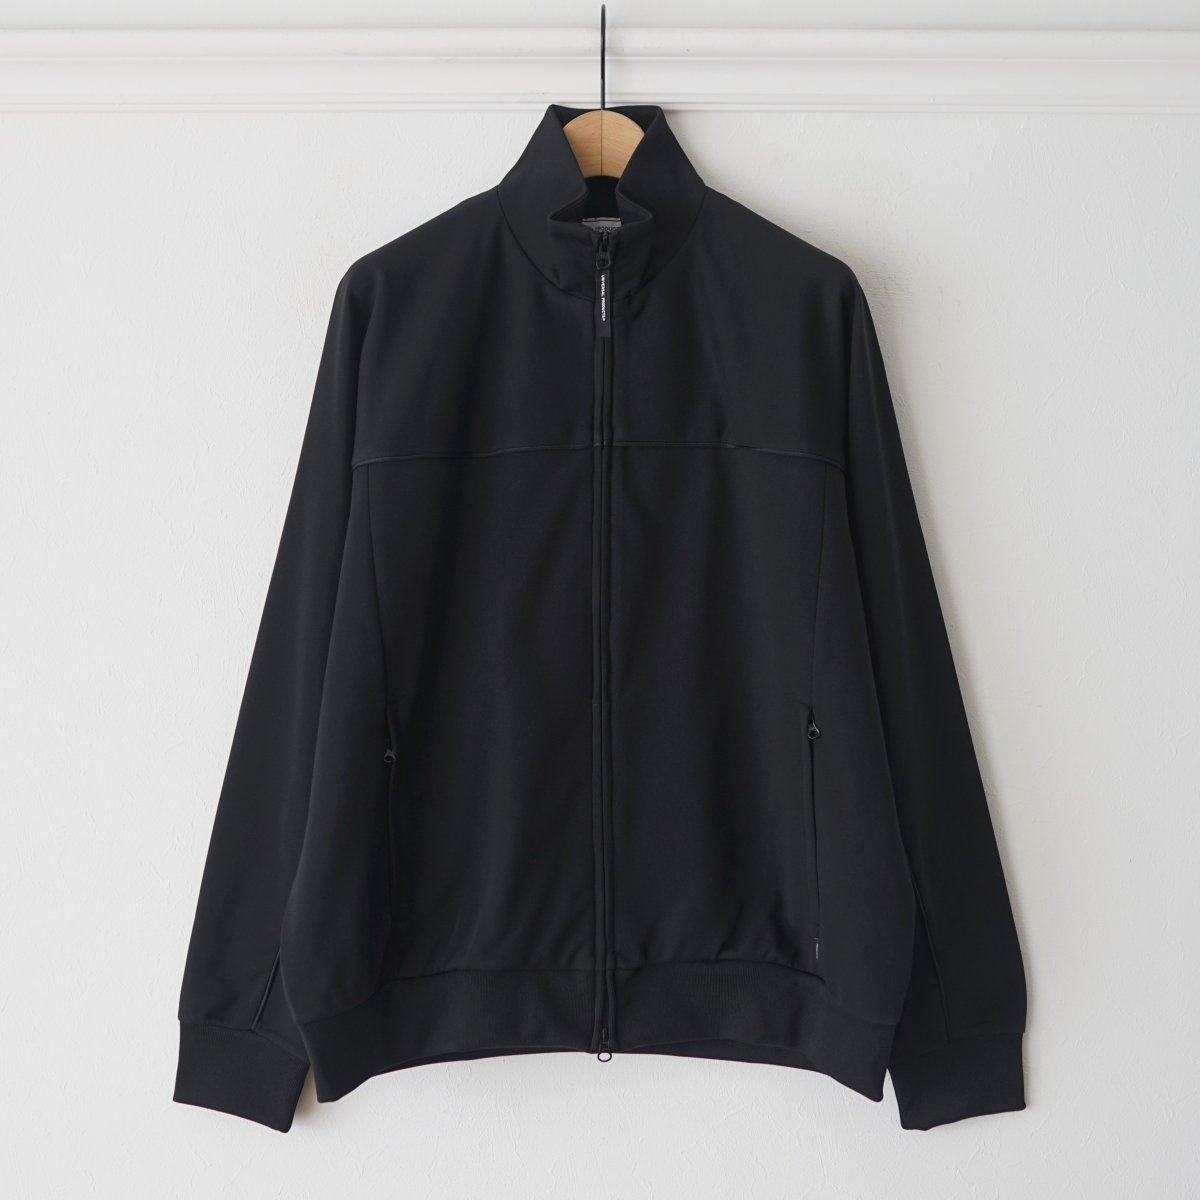 【UNIVERSAL PRODUCTS ユニバーサルプロダクツ】 TECH TRAINING TRACK JACKET - BLACK / PARK  ONLINE STORE